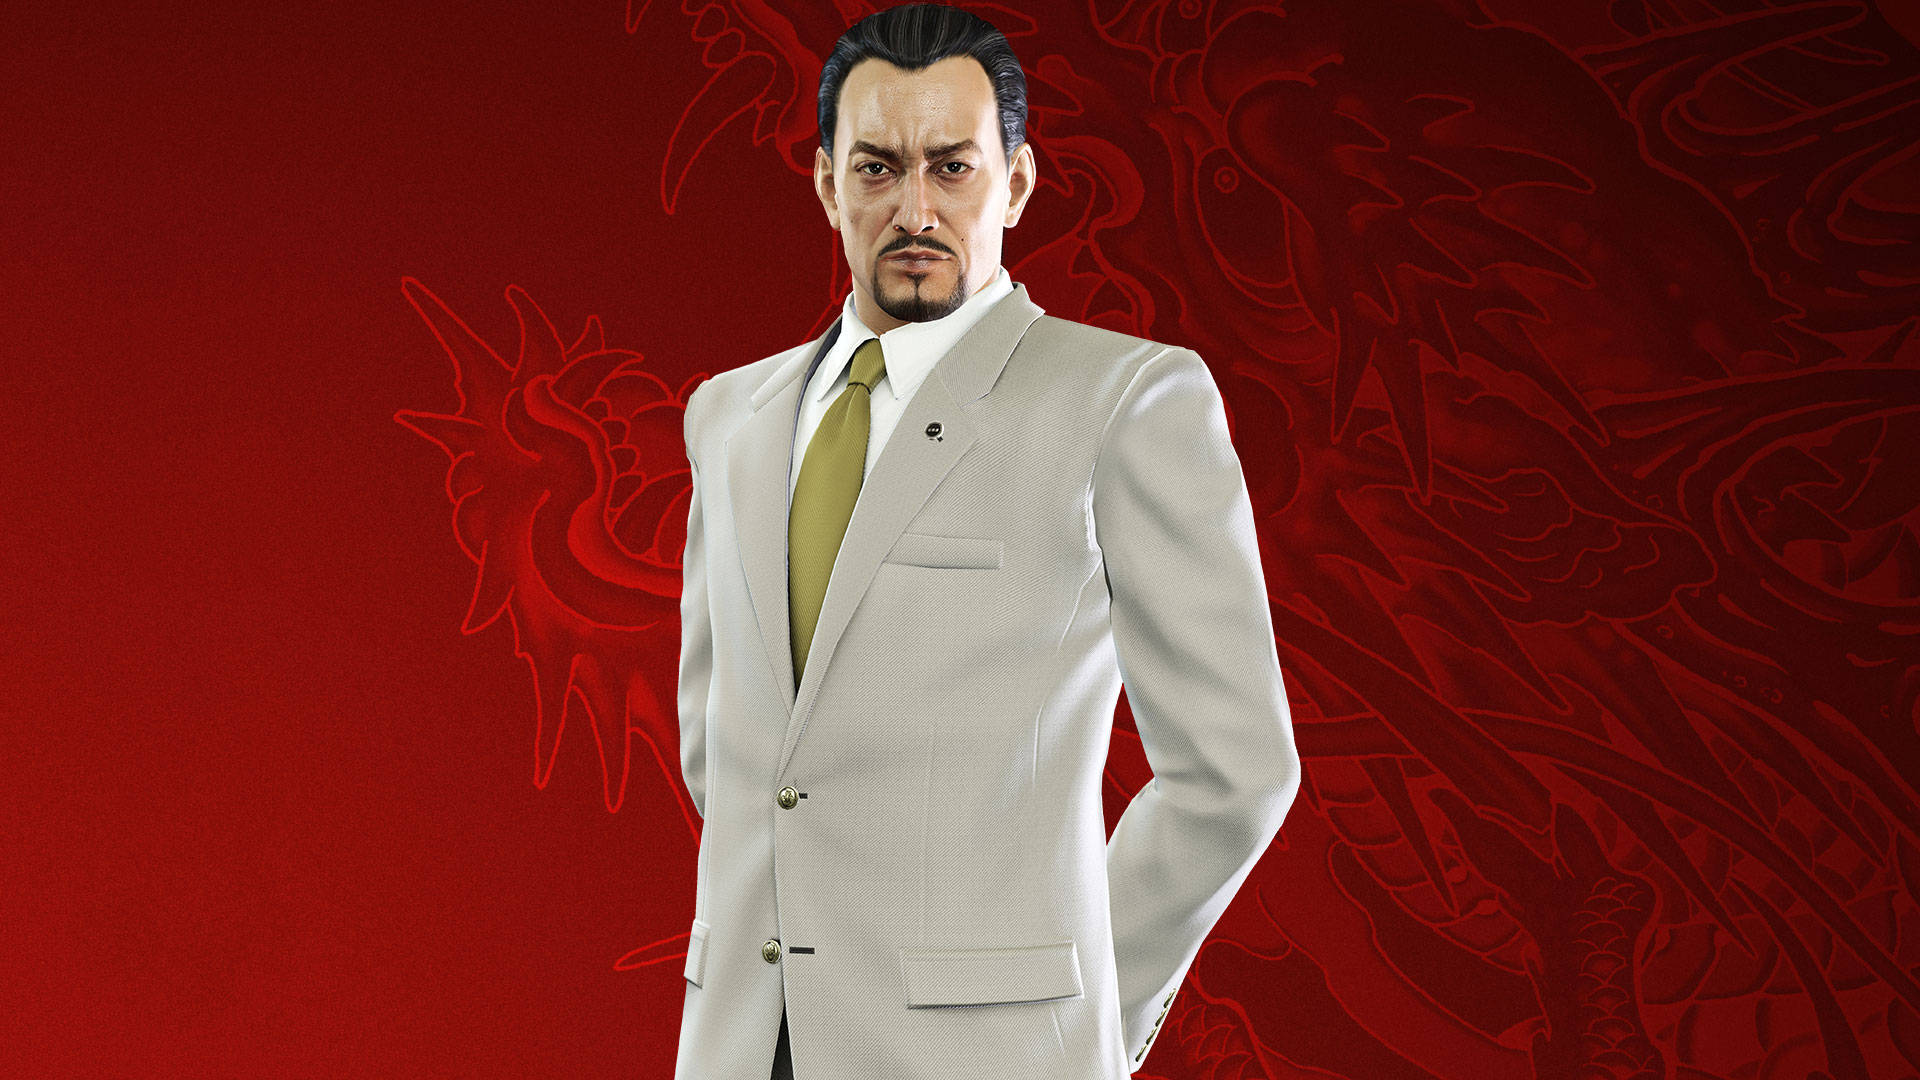 A Man In A White Suit Is Standing In Front Of A Red Background Wallpaper